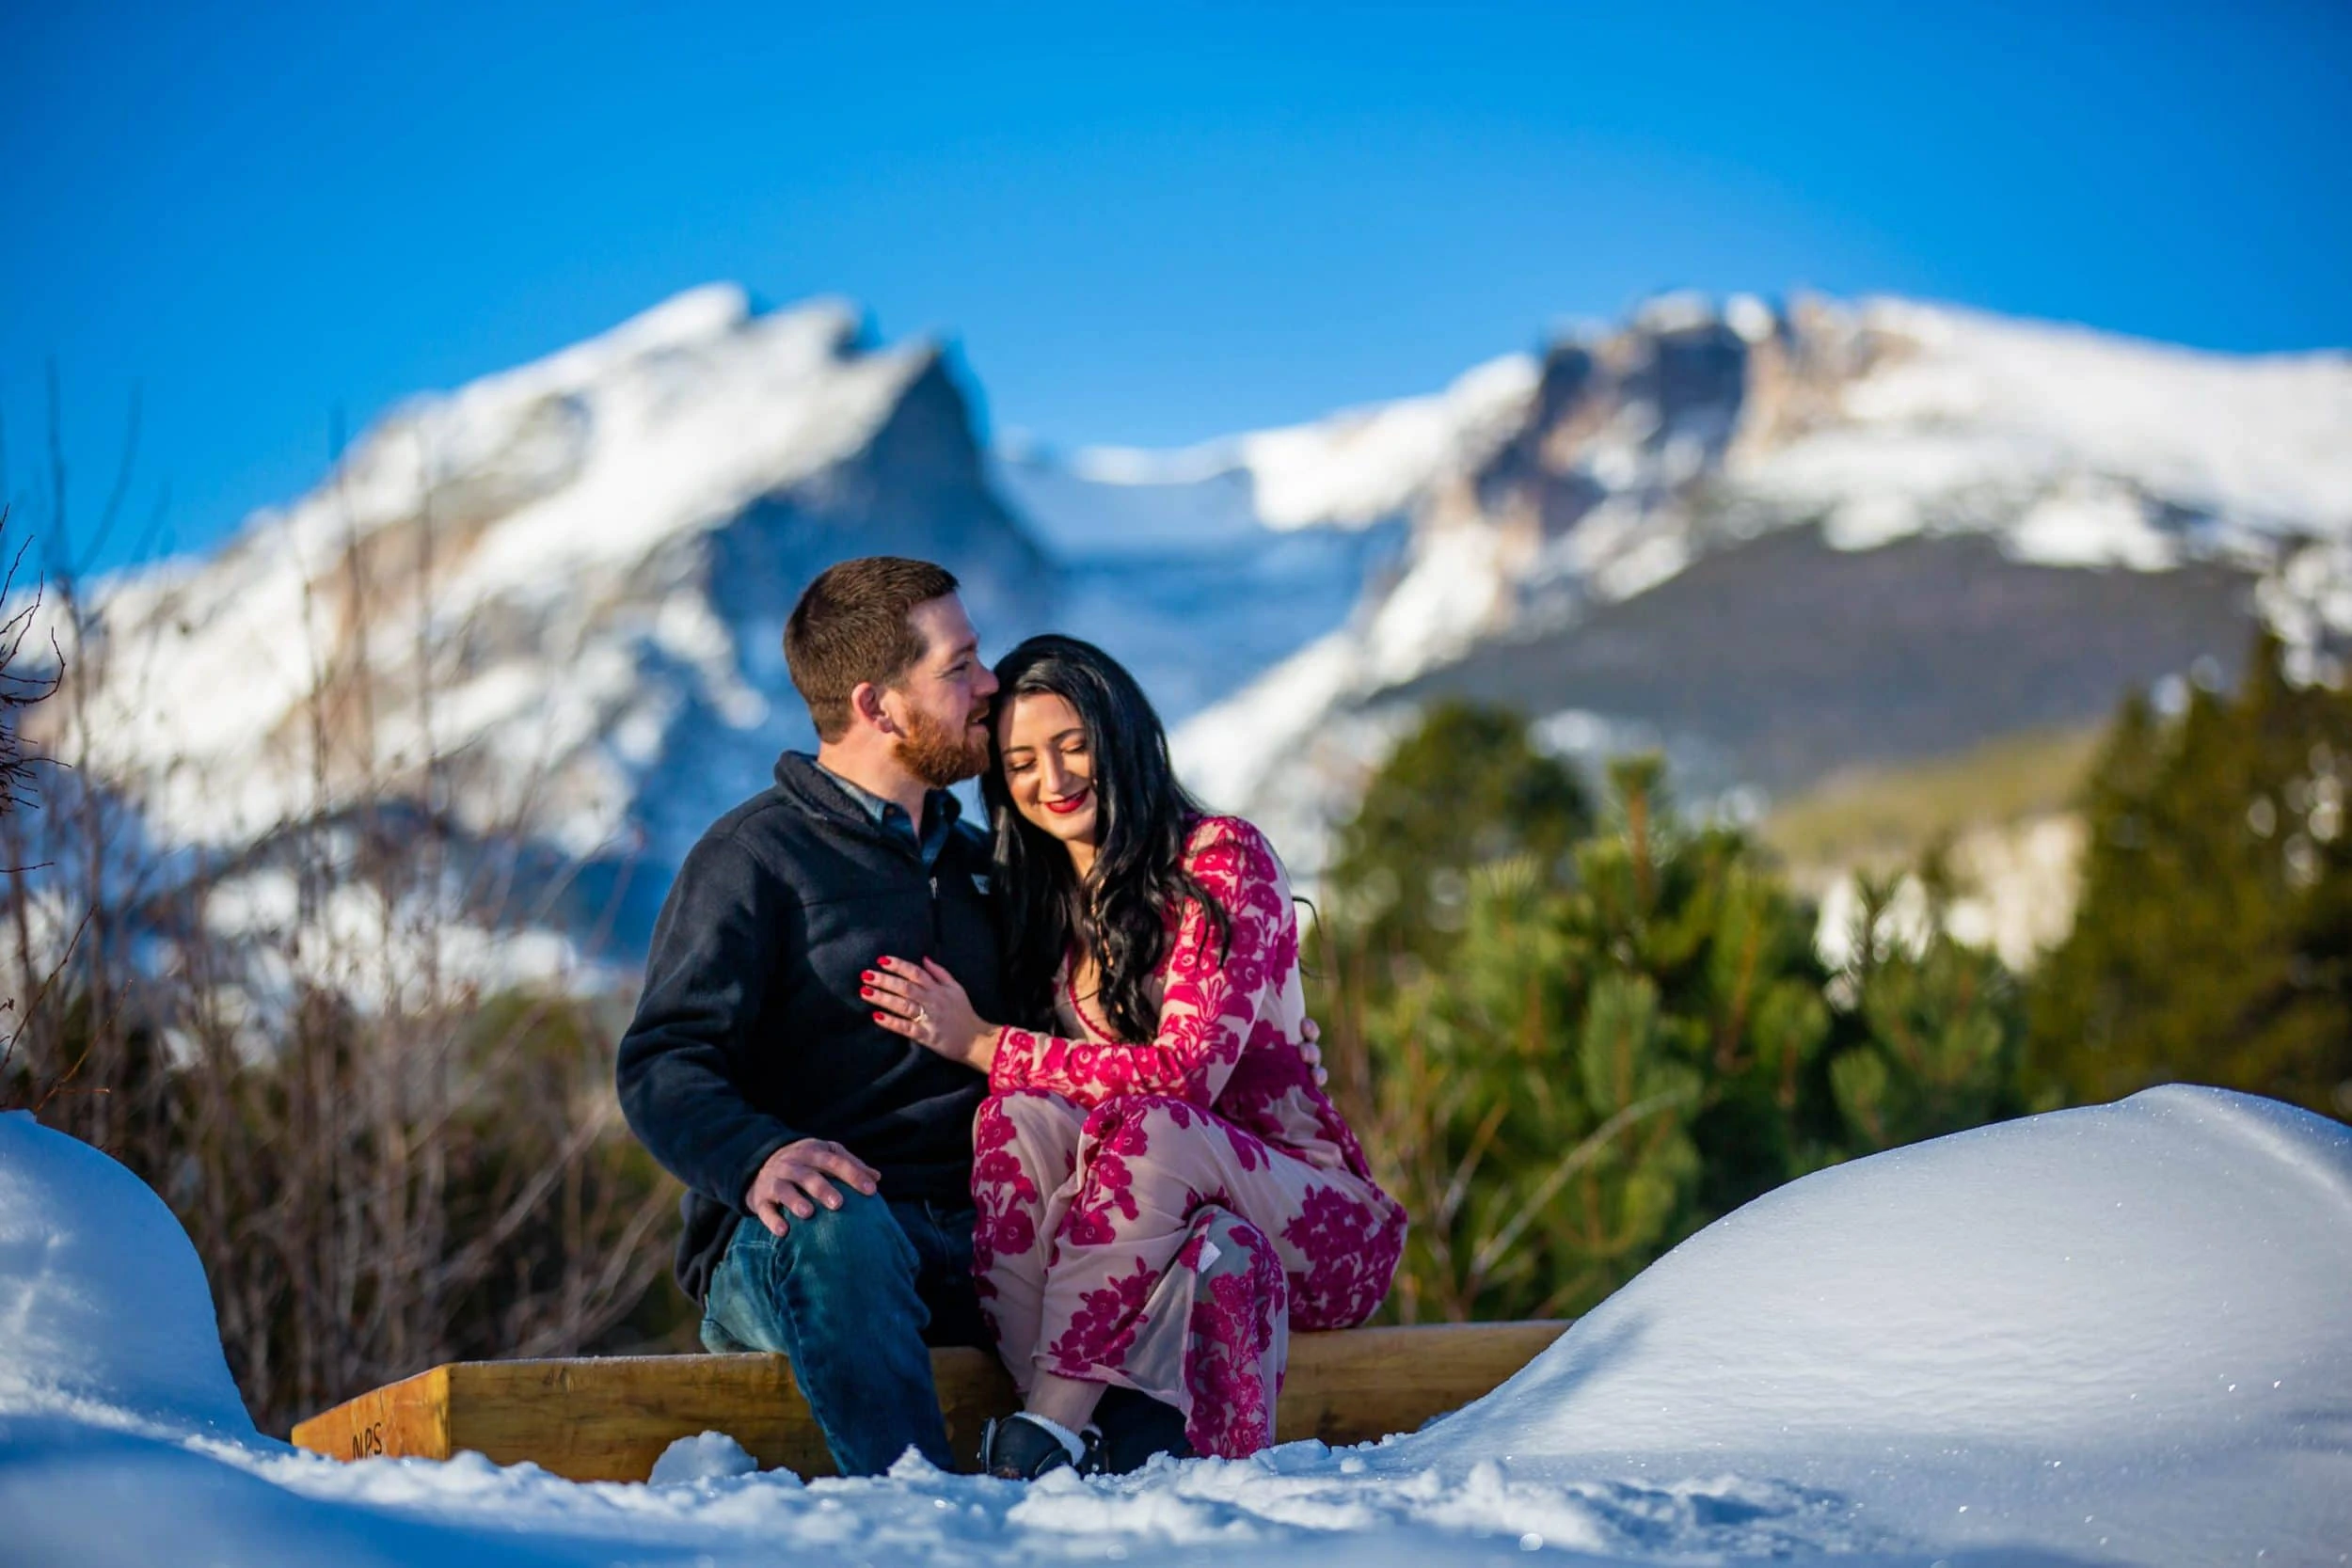 An engagement photo in winter at Sprague Lake in Rocky Mountain National Park.